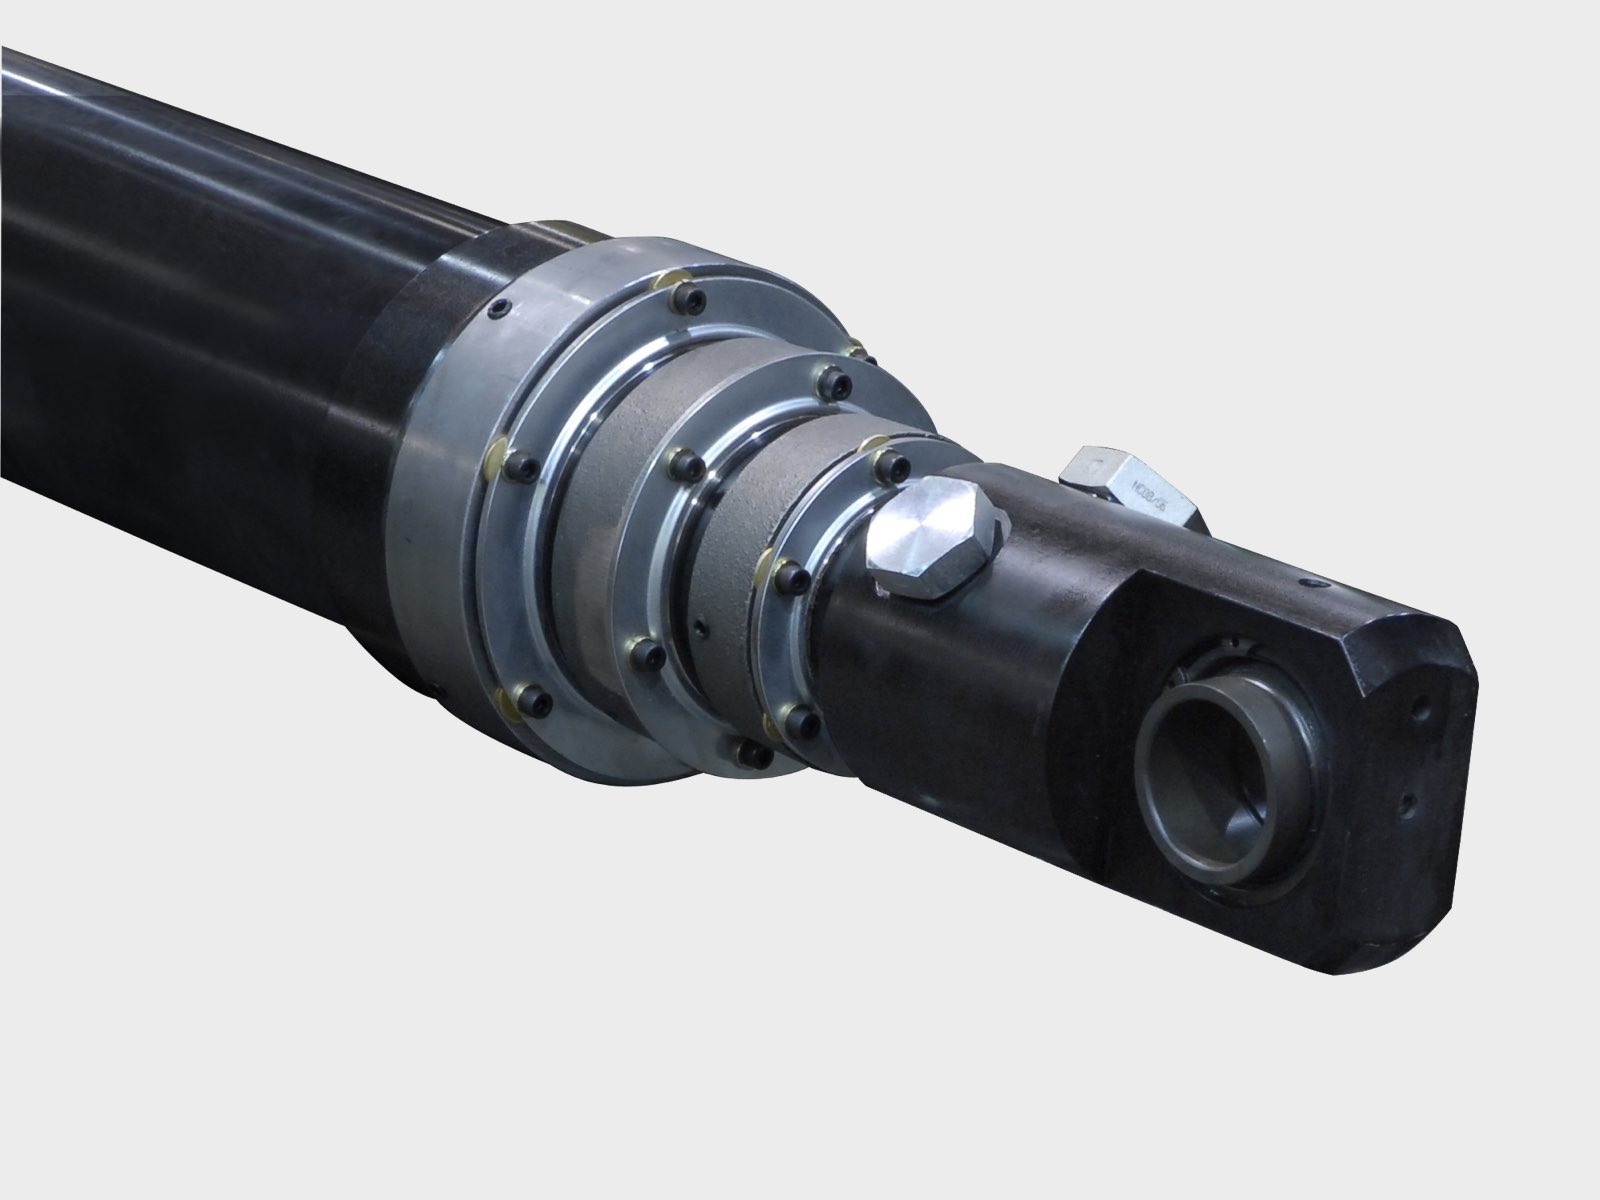 Gladiator cylinders — Purpose-built cylinders. Extended warranty. Nitrocarburized sleeves and rods. Next Gen scraper technology. Unique hydraulic flow—no mis-staging.